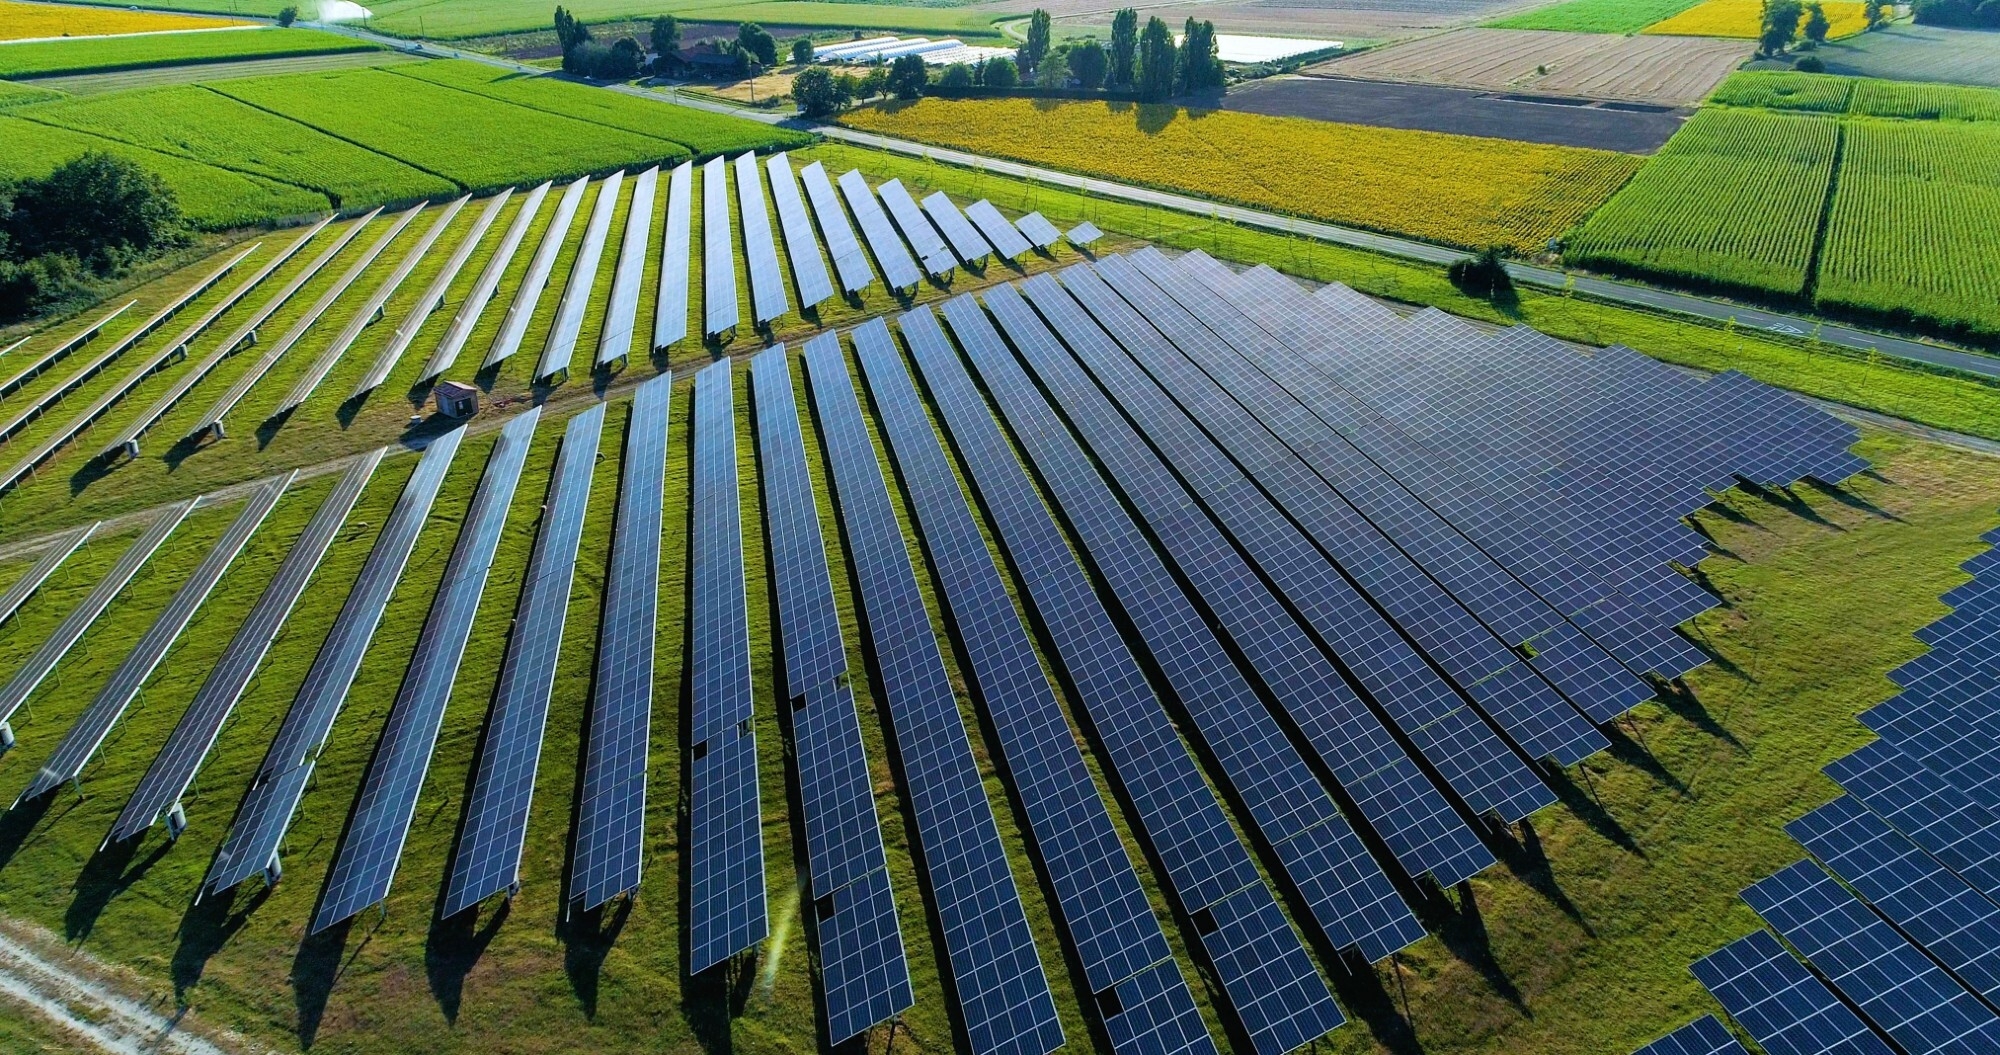 An image of a field of solar panels with lush, green fields in the background